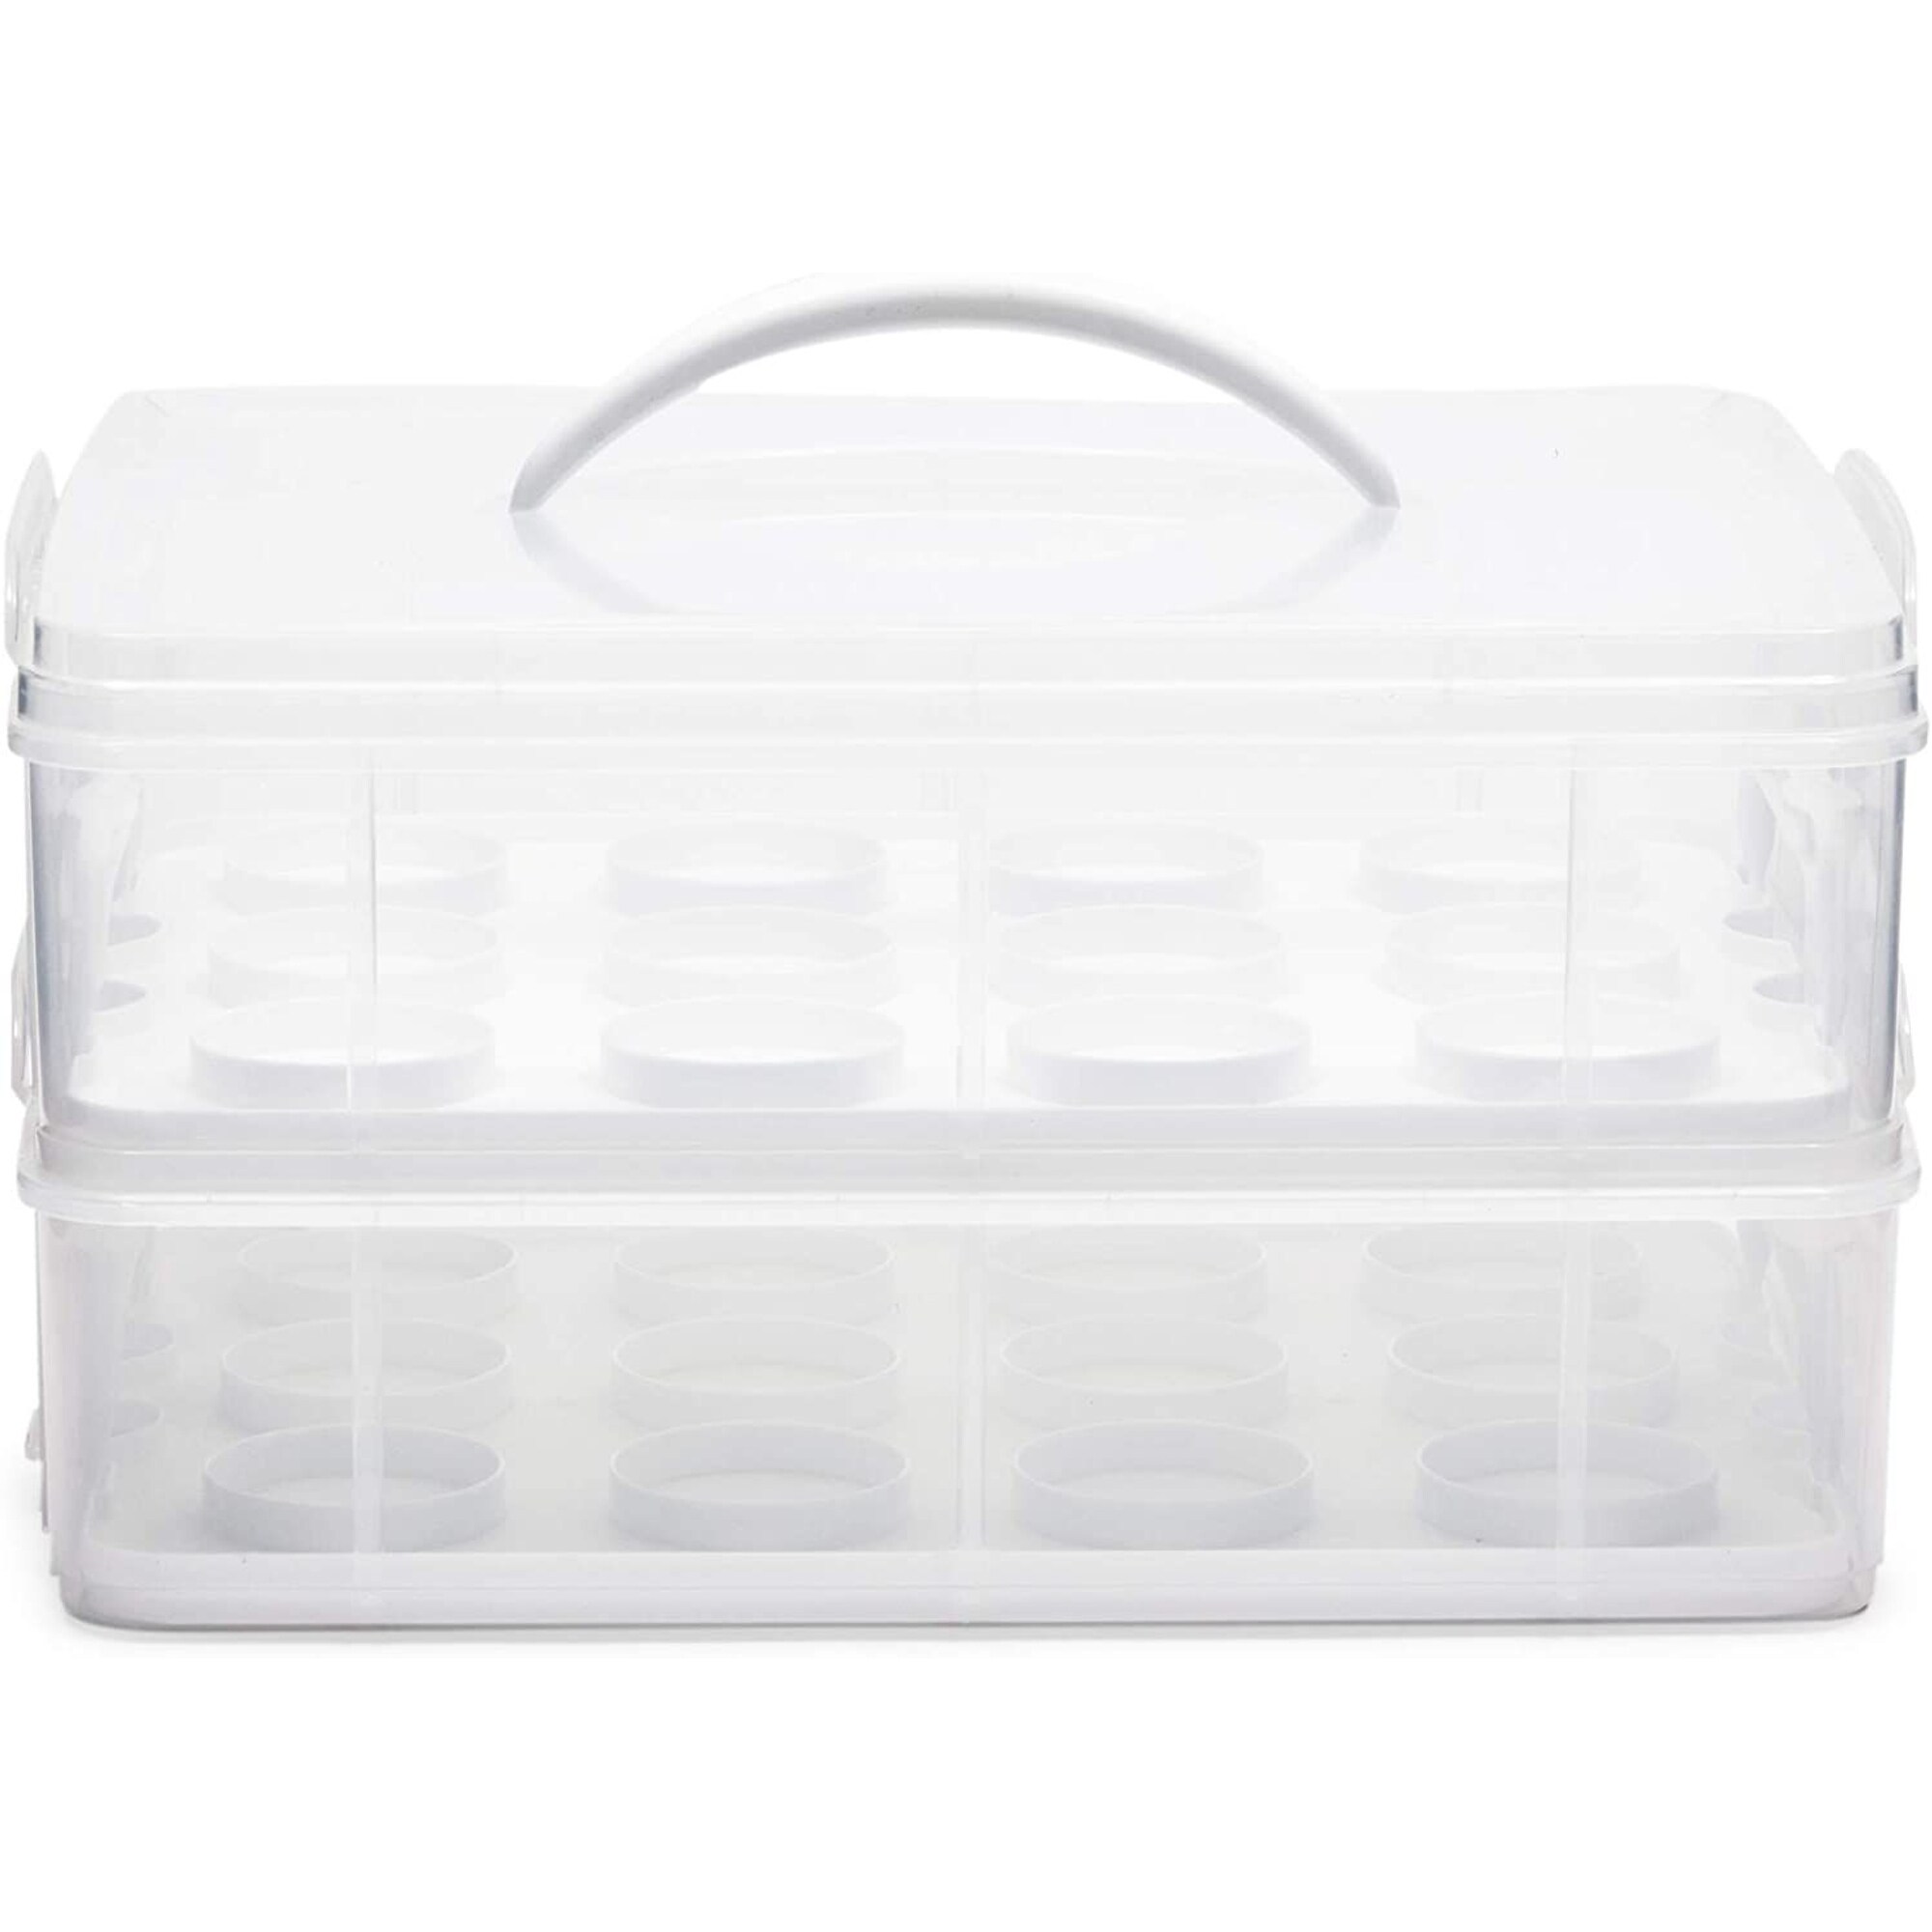 https://ak1.ostkcdn.com/images/products/is/images/direct/5a02c2c7ef5c575984f47c1b25d5ec19a440942a/2-Tier-Cupcake-Carrier-with-Lid%2C-Holds-24-Cupcakes-%2813.5-x-10.25-x-7.5-In%29.jpg